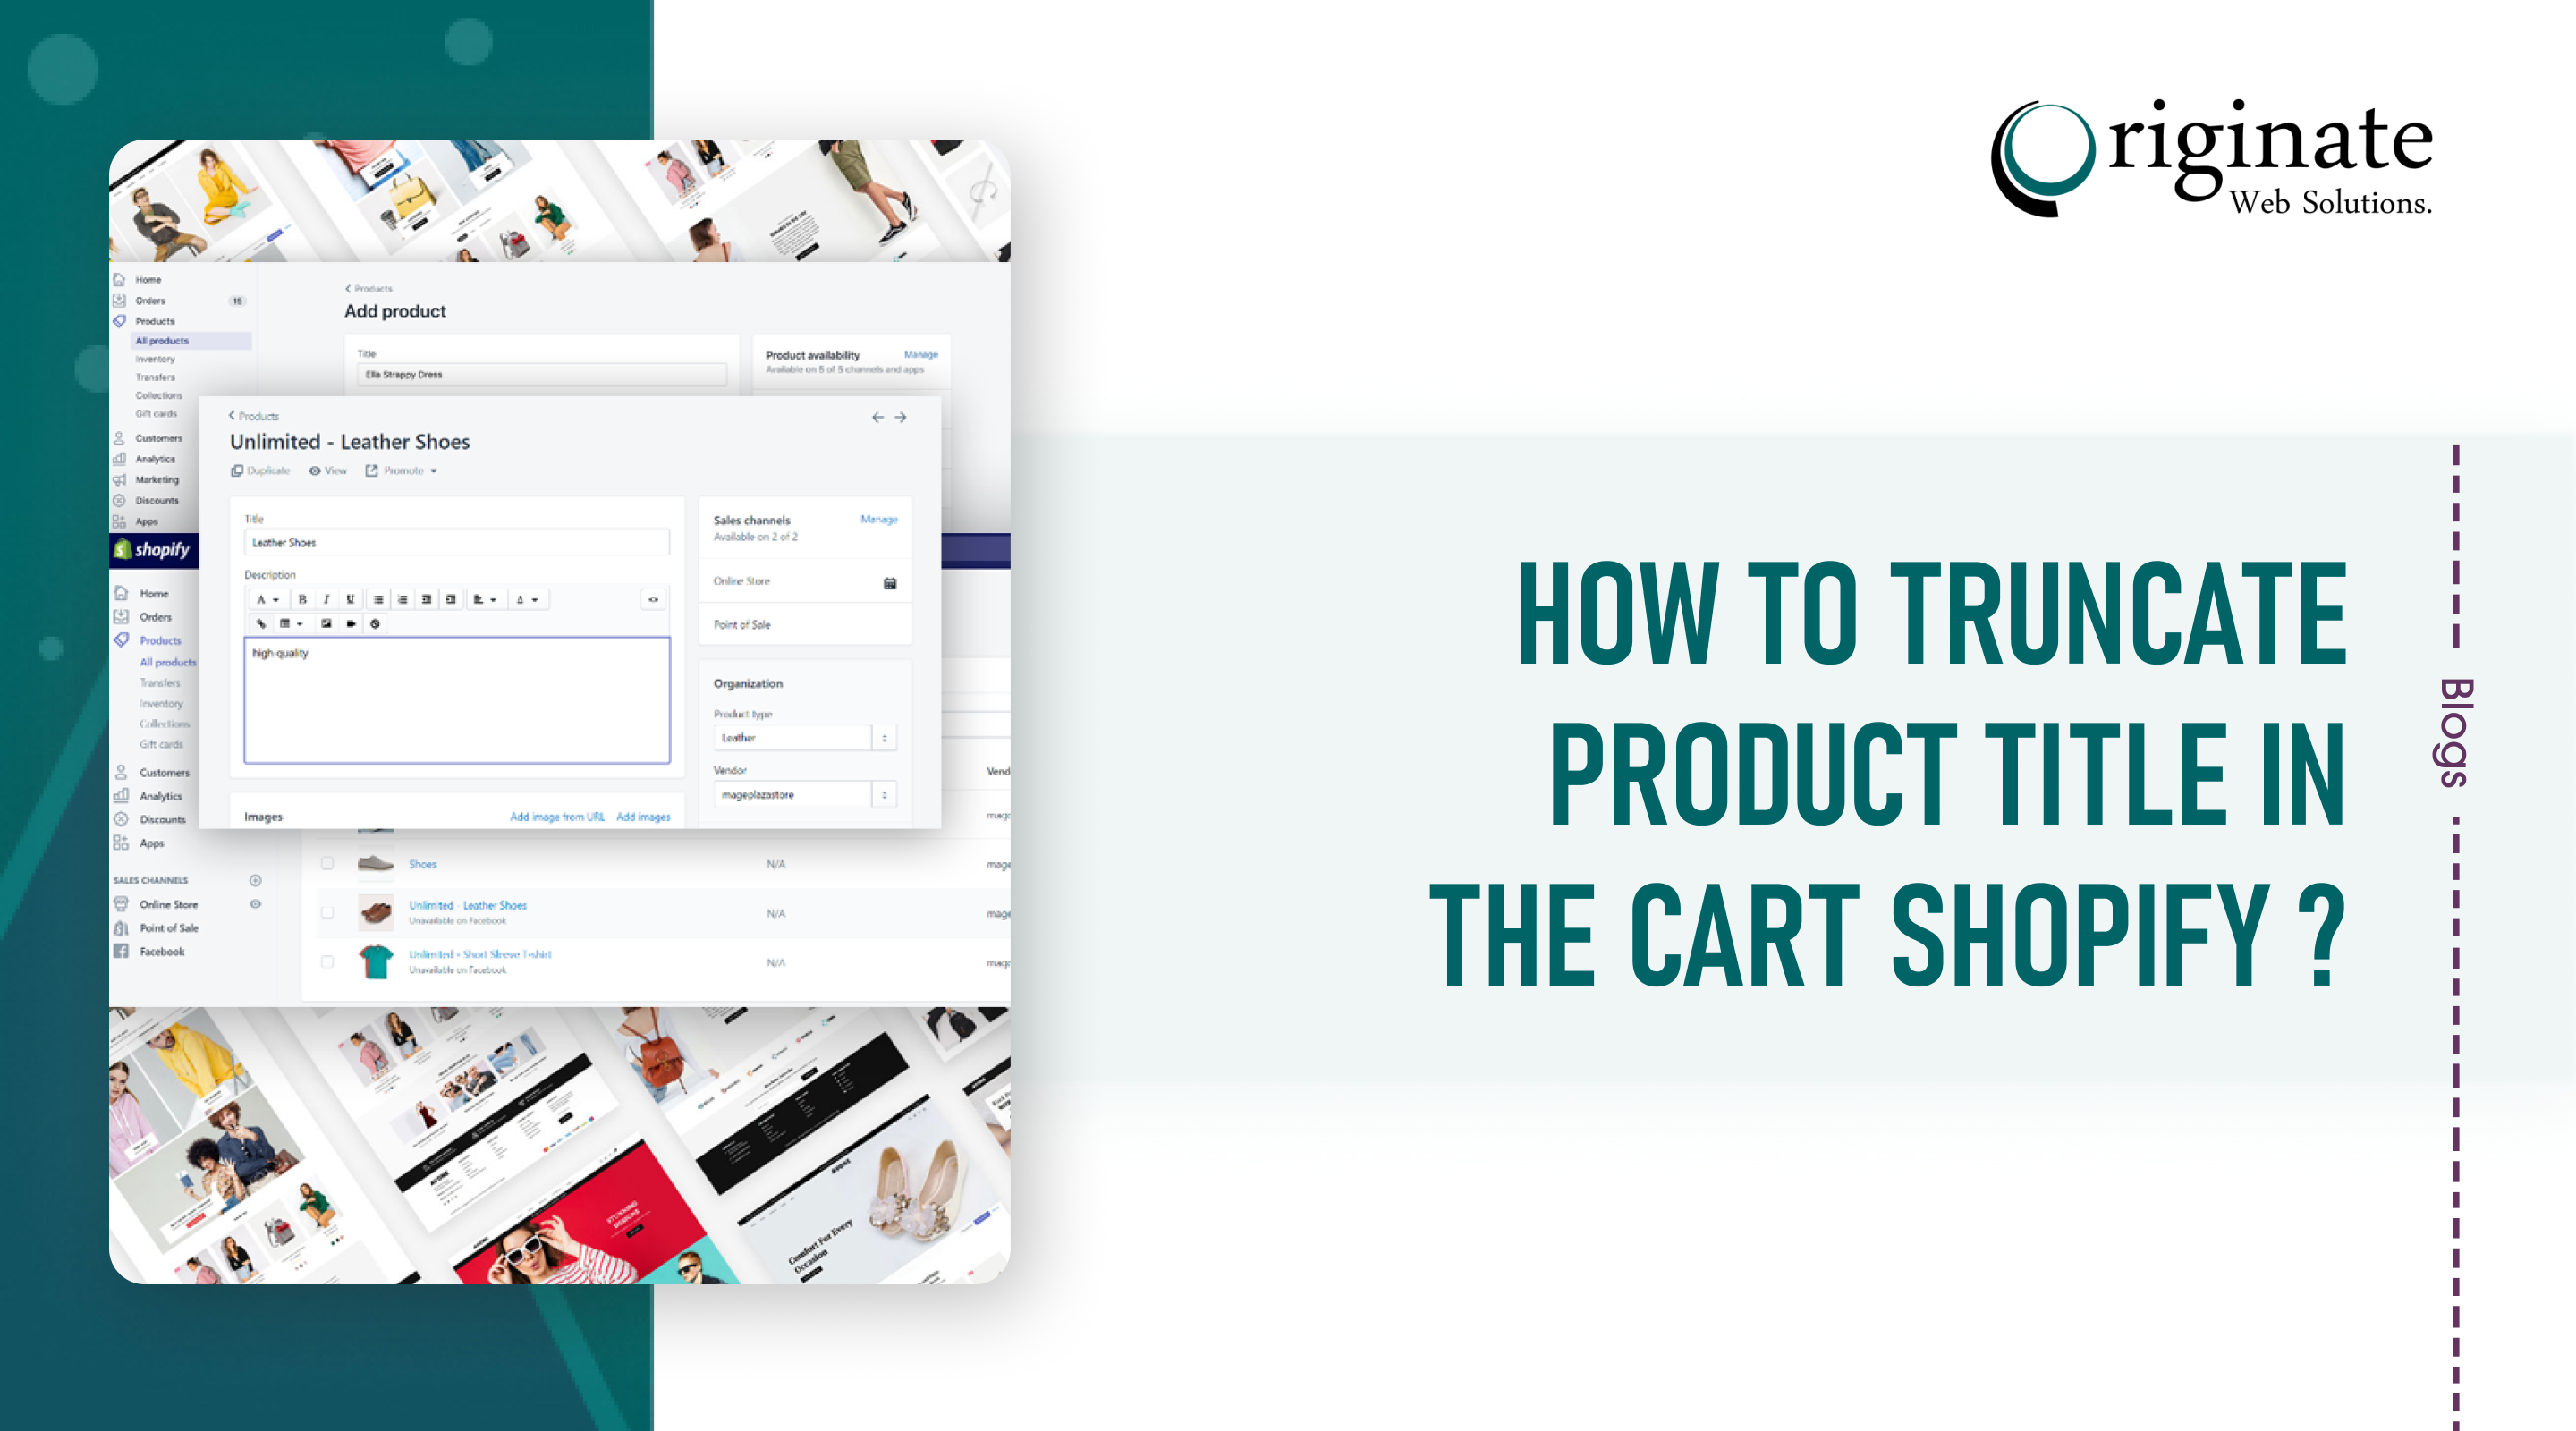 How to Truncate Product Title in The Cart Shopify?